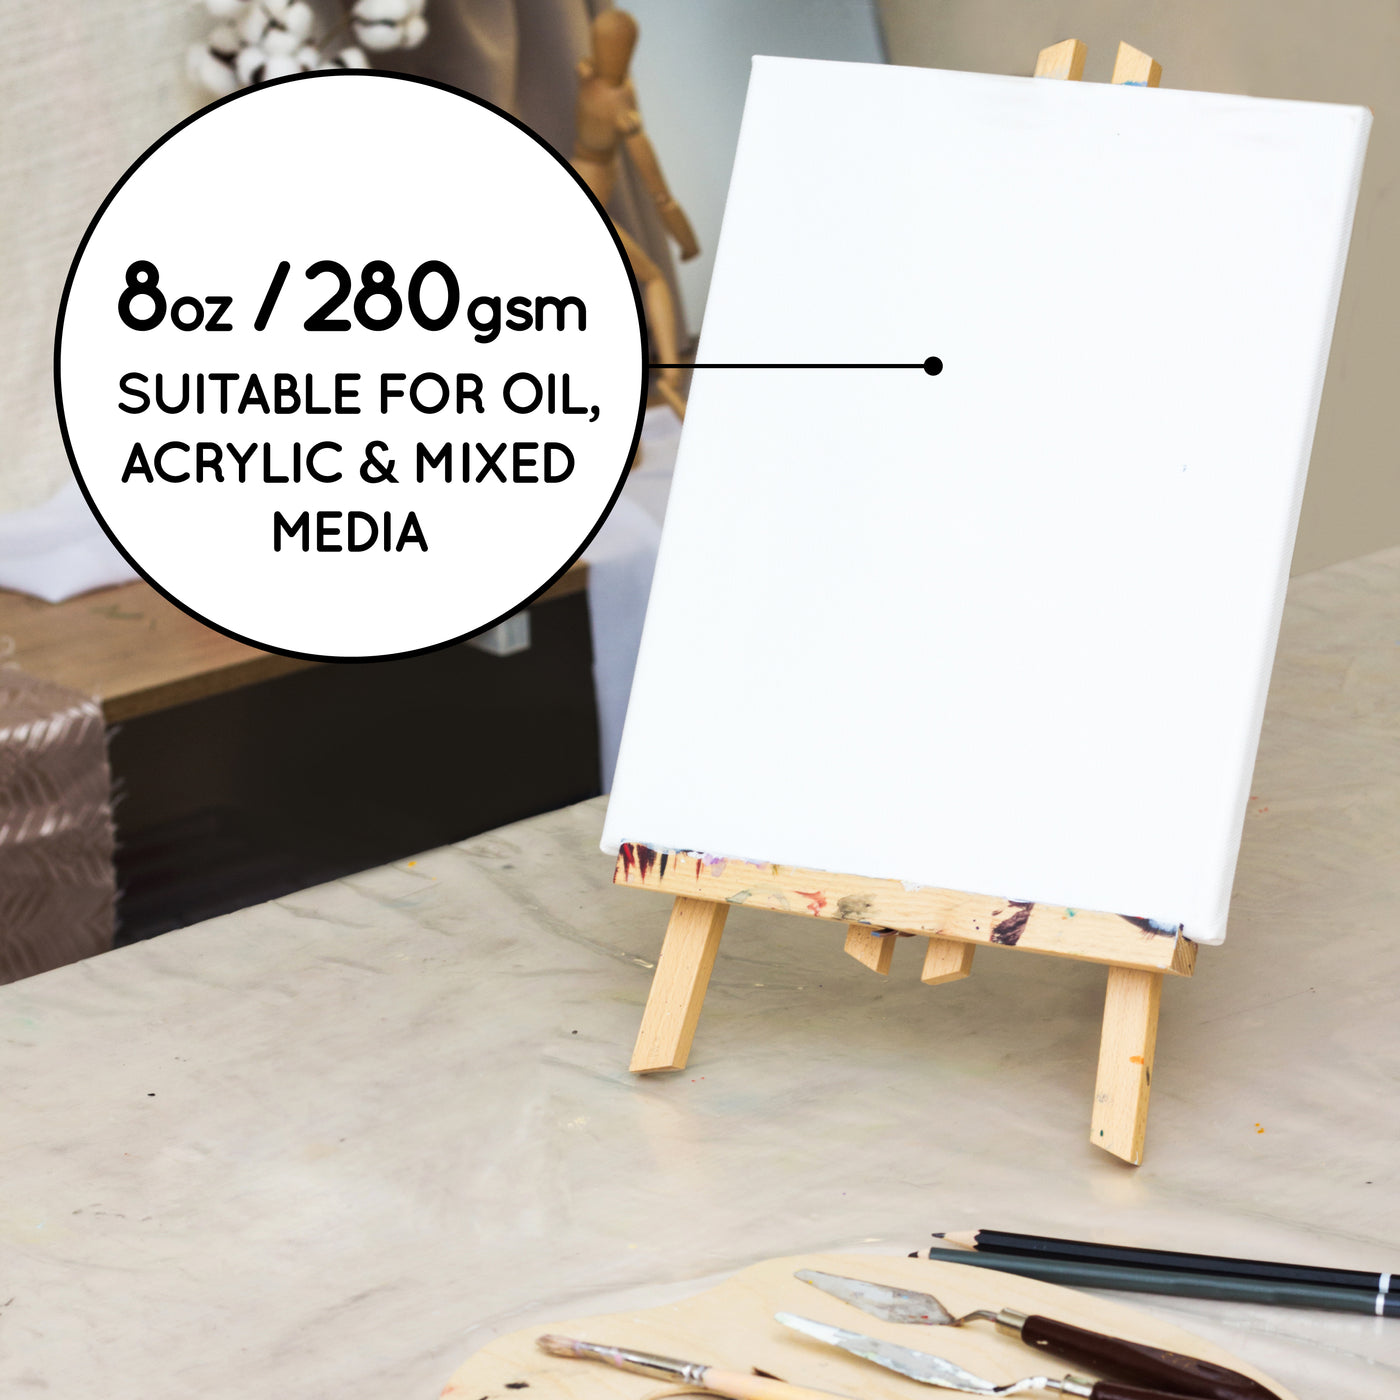 Classic Stretched Canvas, 12 x 12 - Pack of 8